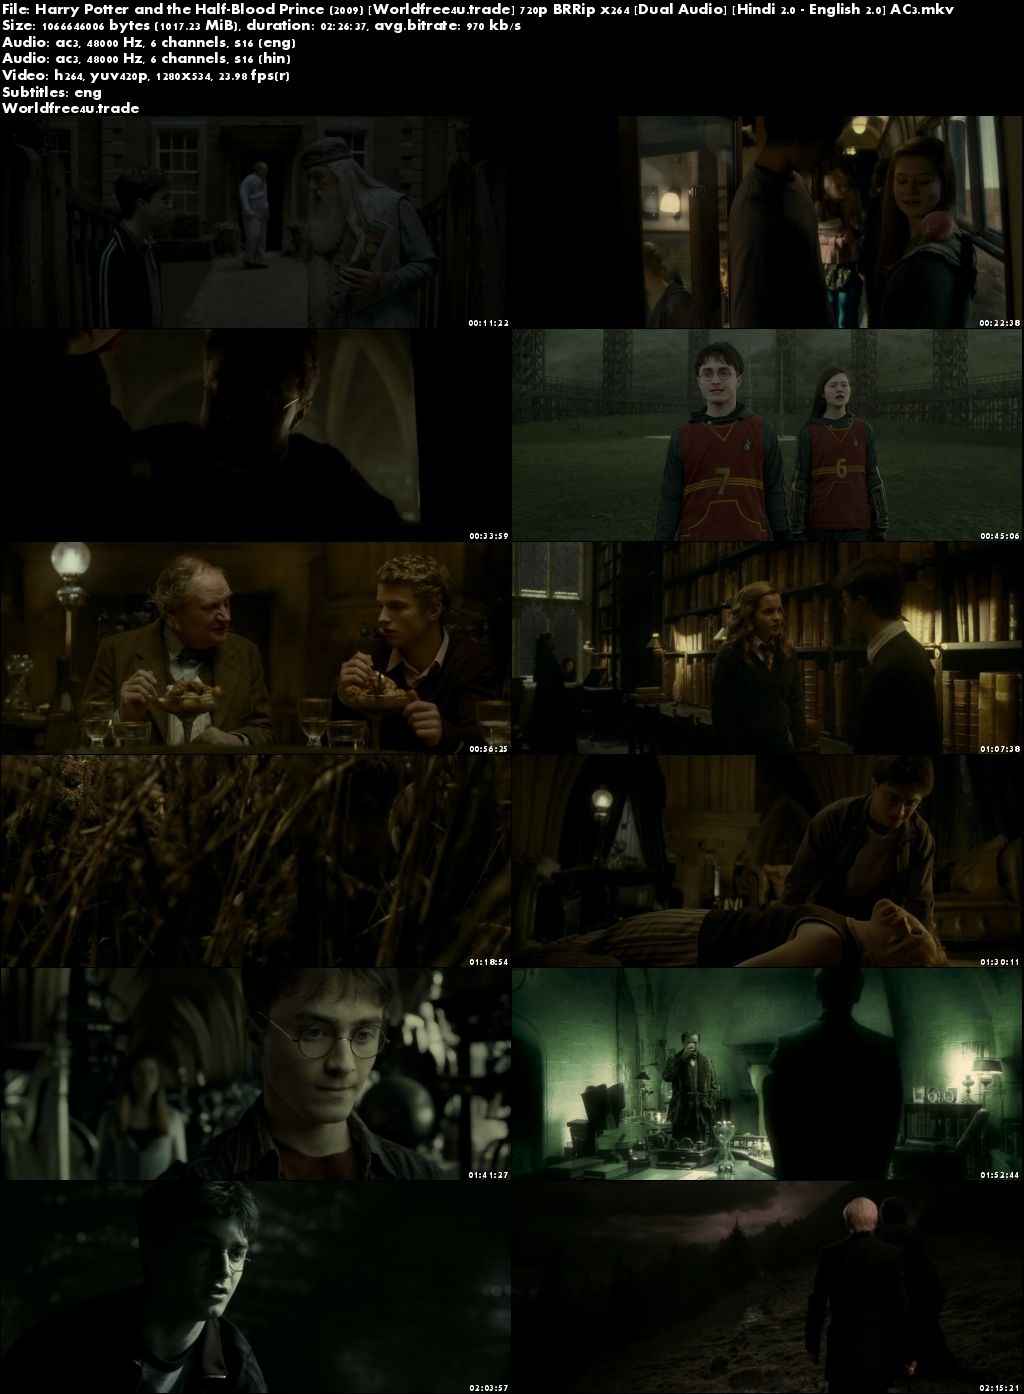 download the new version for iphoneHarry Potter and the Half-Blood Prince